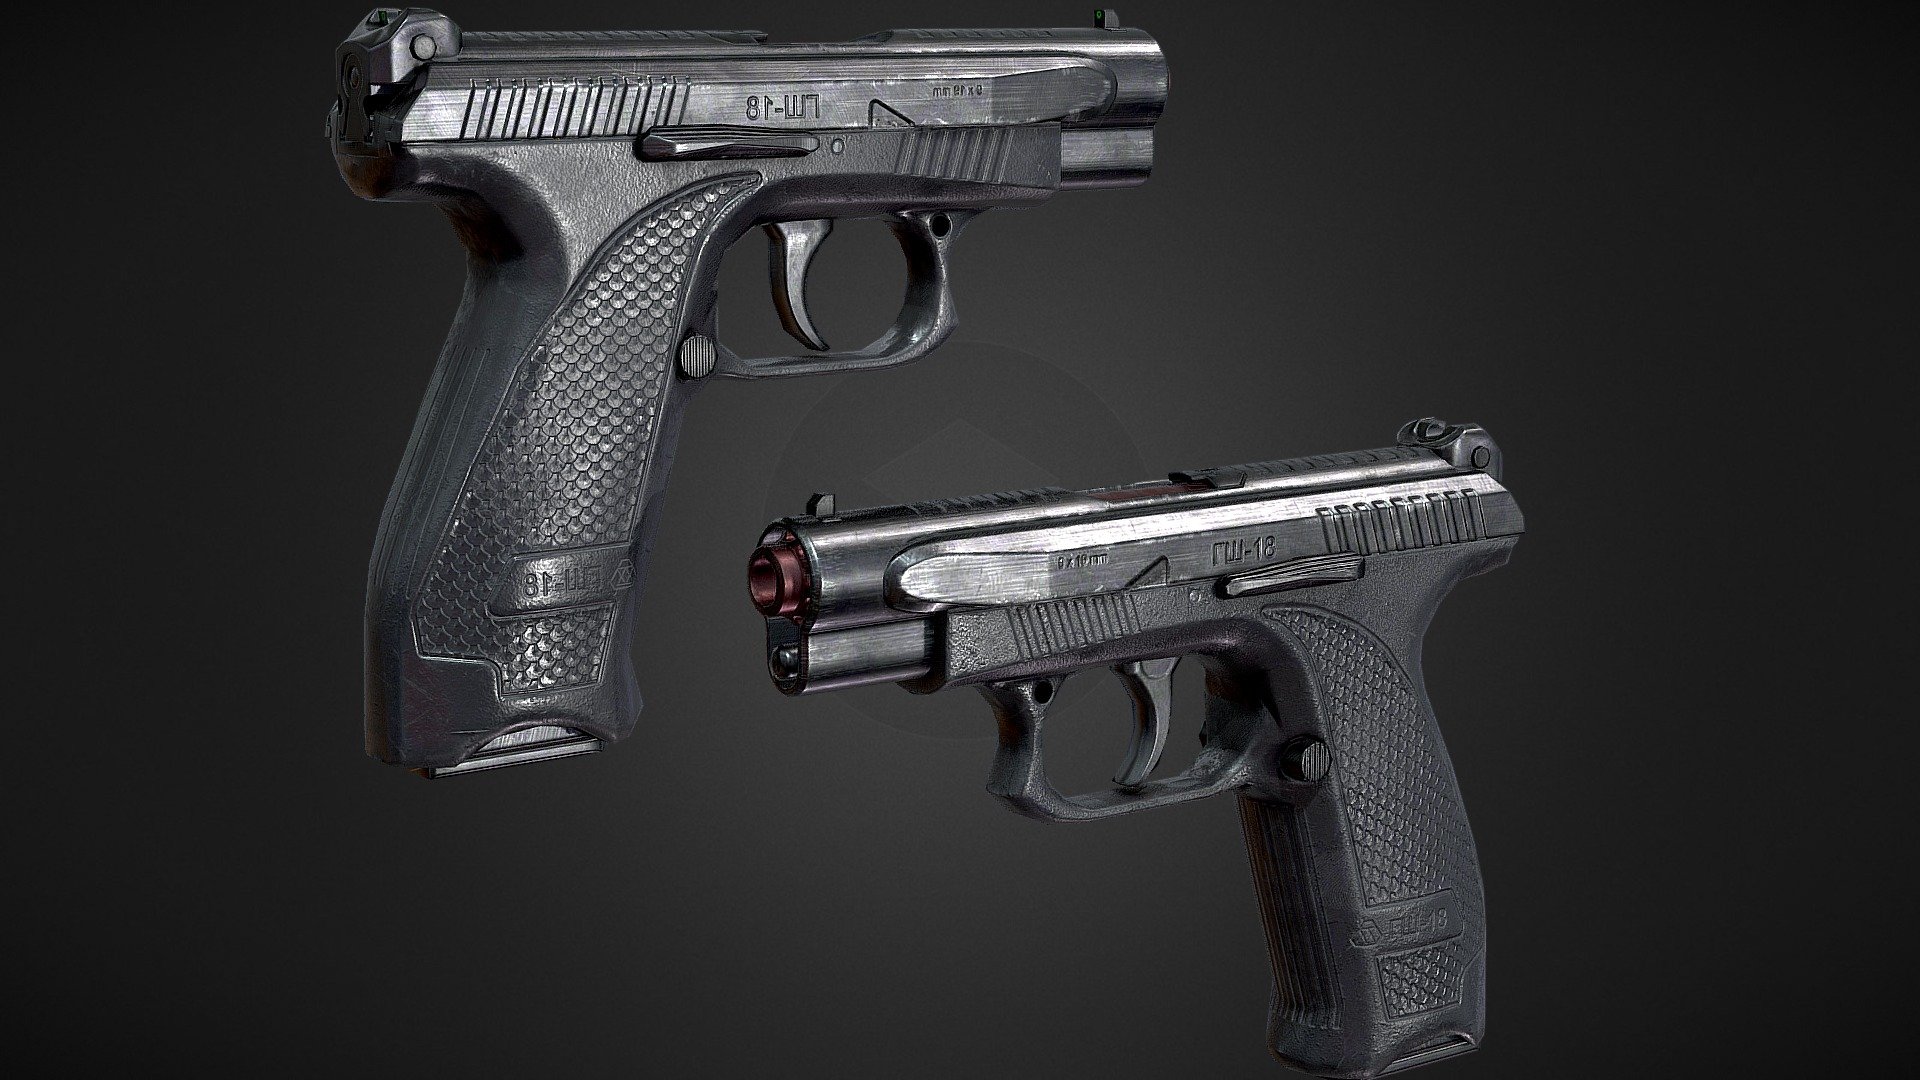 The GSH-18 Pistol Optimized for mobile/Standalone VR applications with a polycount of 2777Tris

The version to the right has a single 1024x1024 texture while the Left is the 4096x4096 Version. The 1024x1024 version suffers a little bit due to sketchfab texture compression but should look cleaner in your target engine if compression quality is set to high or none.

For correct rotations in Unity engine you might need to tick the “Bake axis conversion” import option when importing the FBX.

Note that an additional 128x128 texture set is used for the 9x19mm Bullets inside the weapon on the right version while the left one uses a 1024x1024 texture for the bullet 3d model